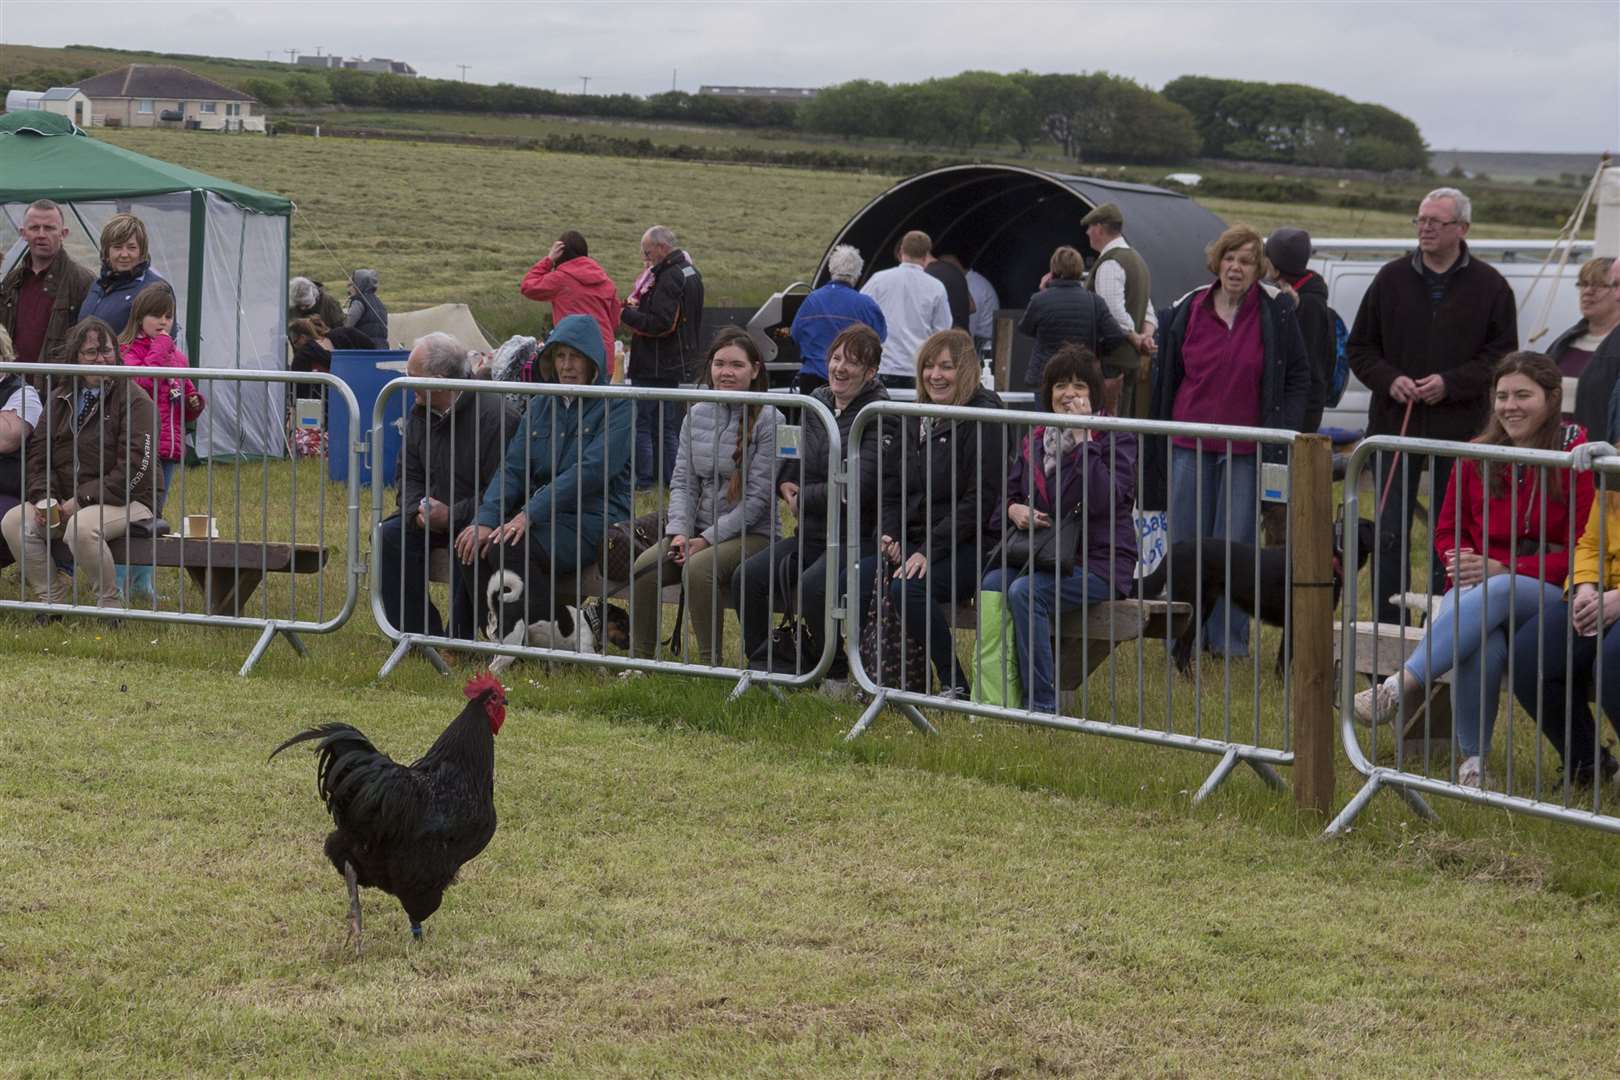 The poultry champion caused laughter when he didn't fancy taking part in the champion of champions line-up and tried to make his escape across the main ring. Picture: Robert MacDonald / Northern Studios